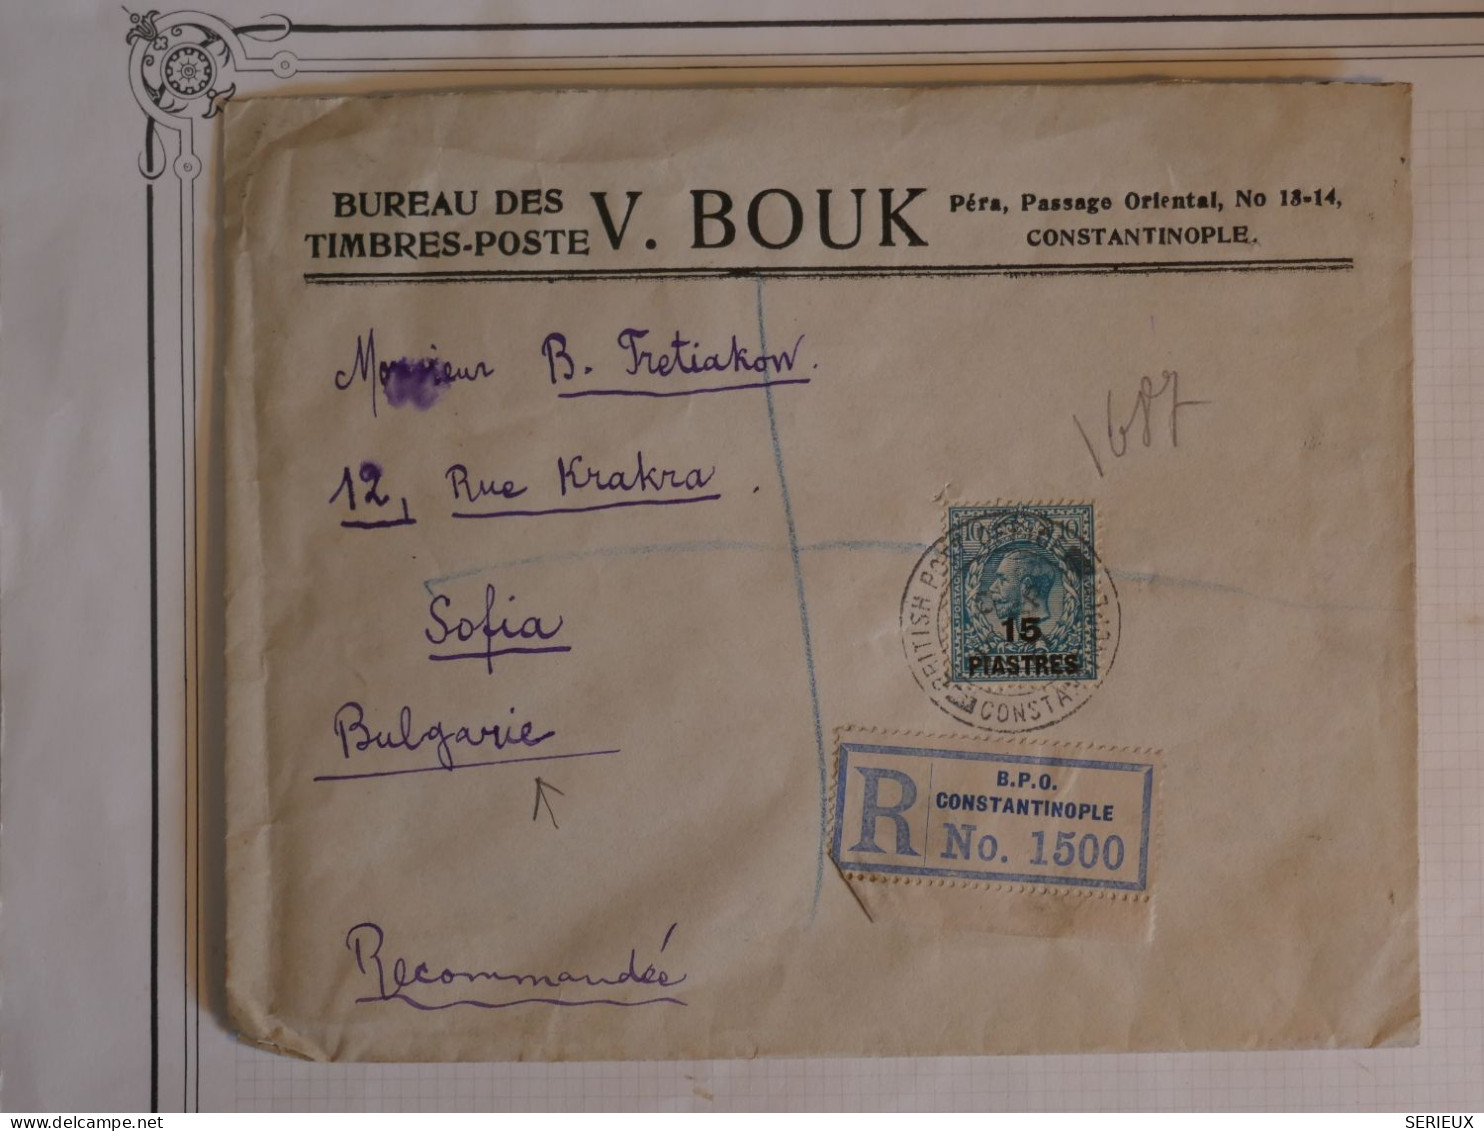 BW9 TURQUIE  BELLE LETTRE RR  RECO 1921 CONSTANTINOPLE A SOFIA  BULGARIE  +SURCHARGE+CACHET CIRE INITIALES ++ + - Lettres & Documents